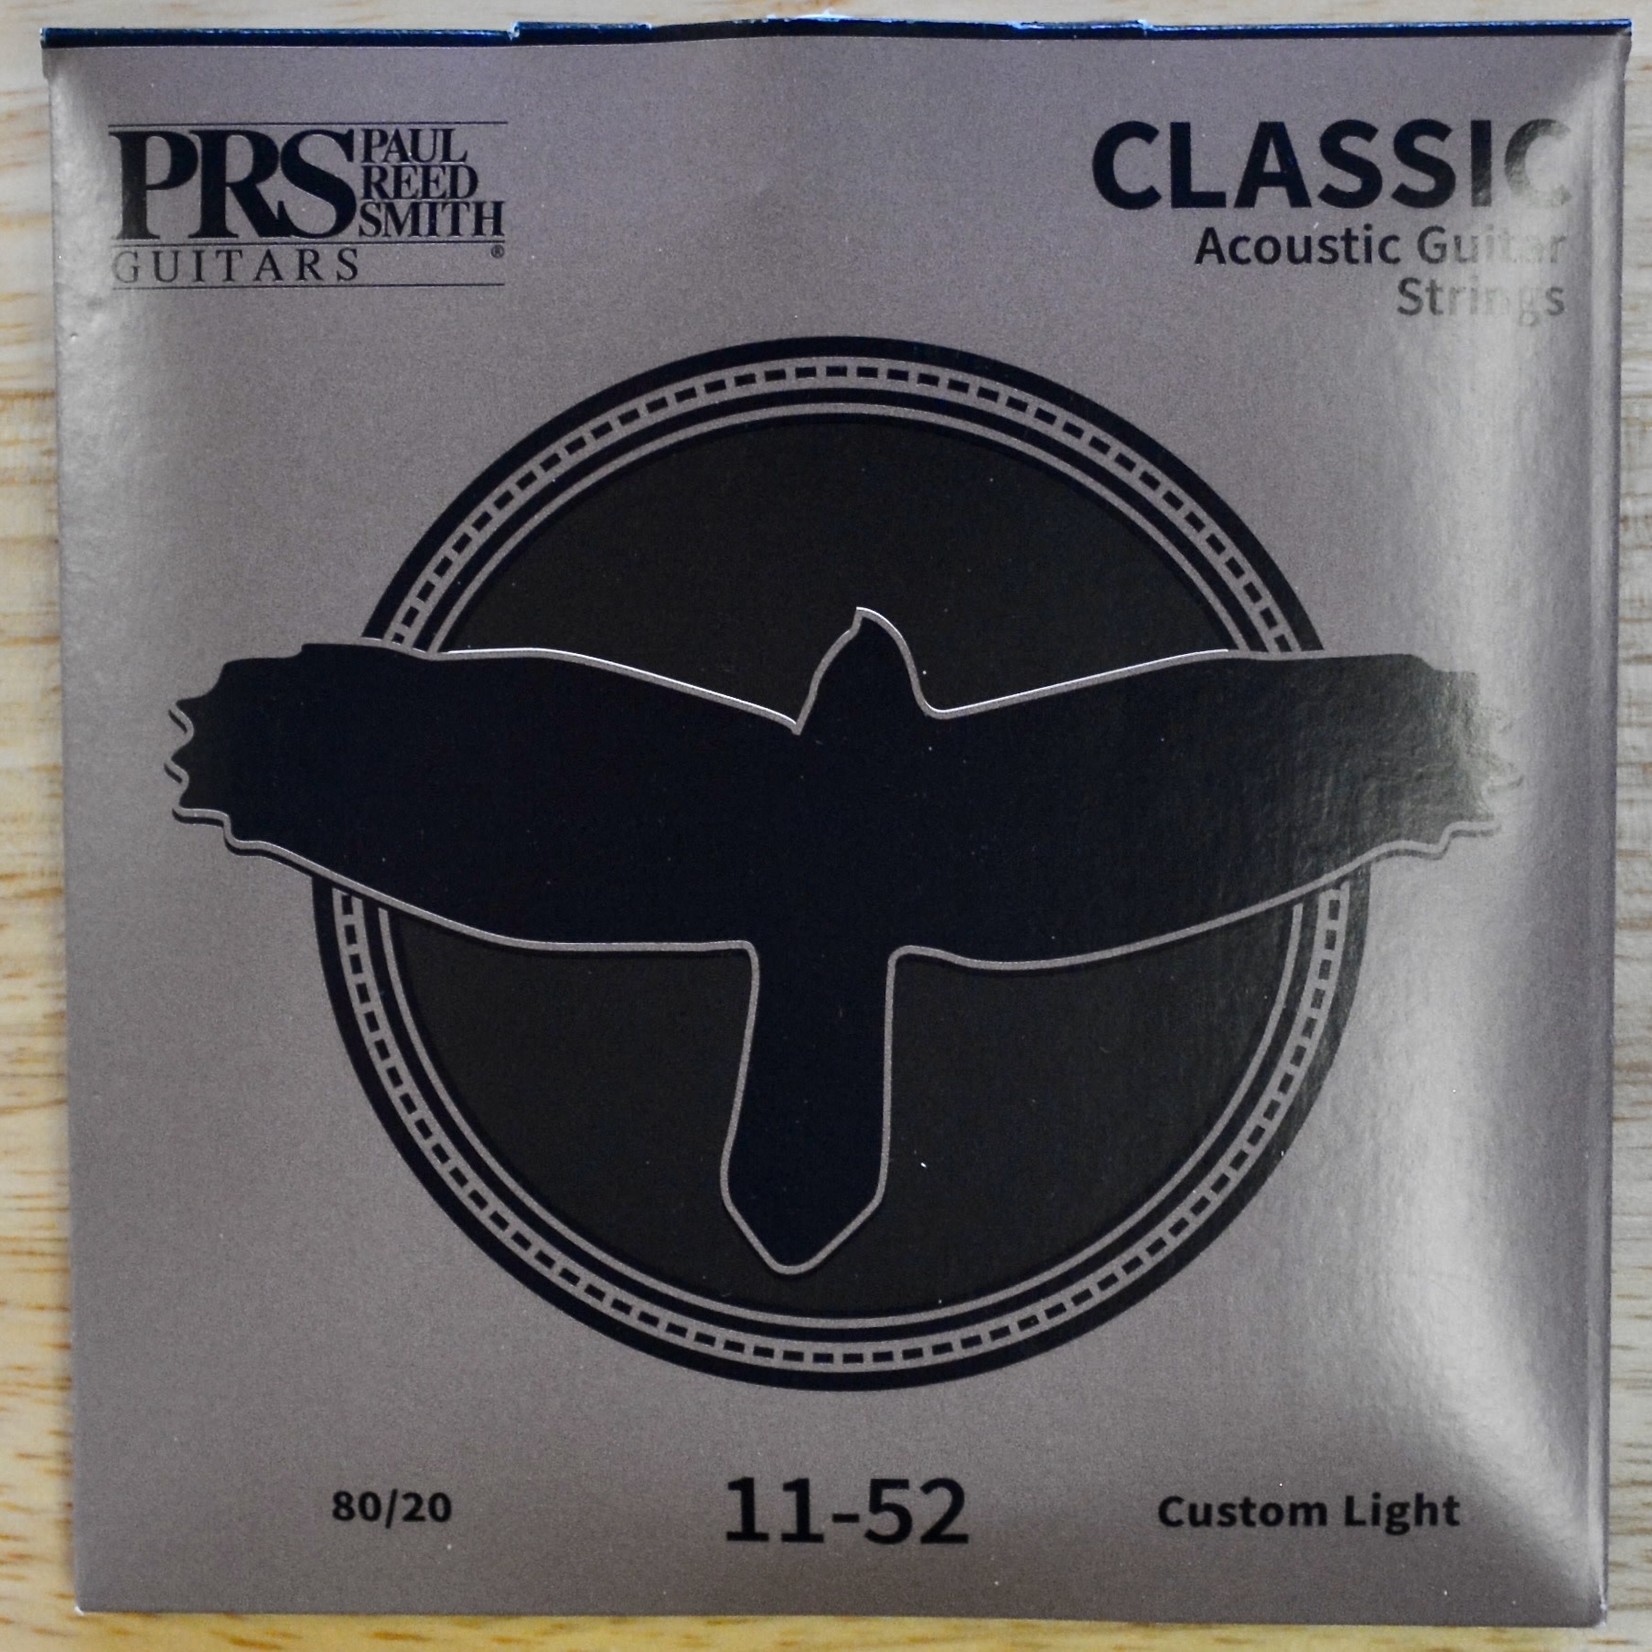 Paul Reed Smith PRS Classic Acoustic Strings 80/20, Custom Light .011-.052